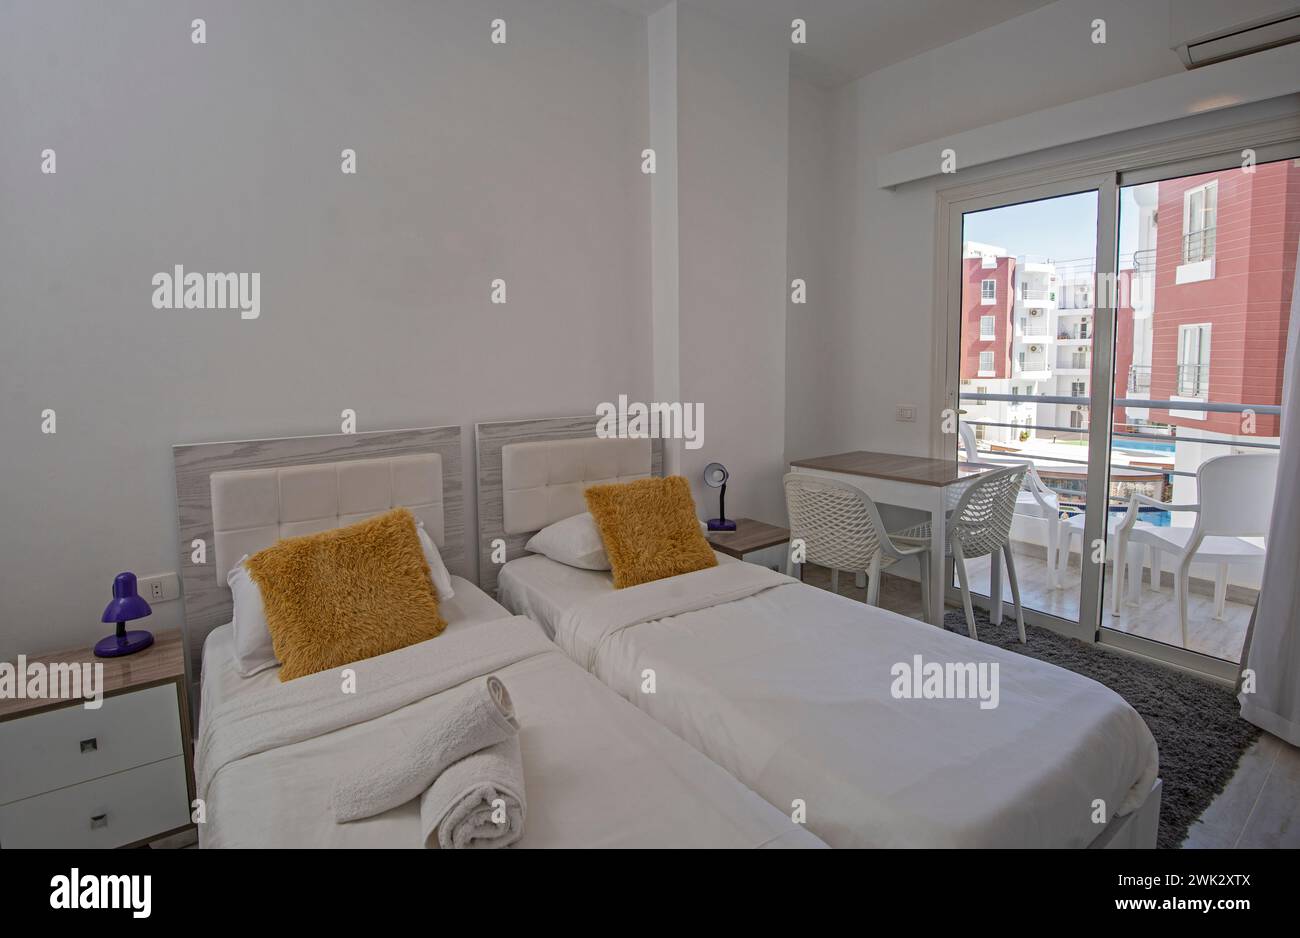 Interior design decor furnishing of luxury show home bedroom showing furniture and twin beds with balcony Stock Photo